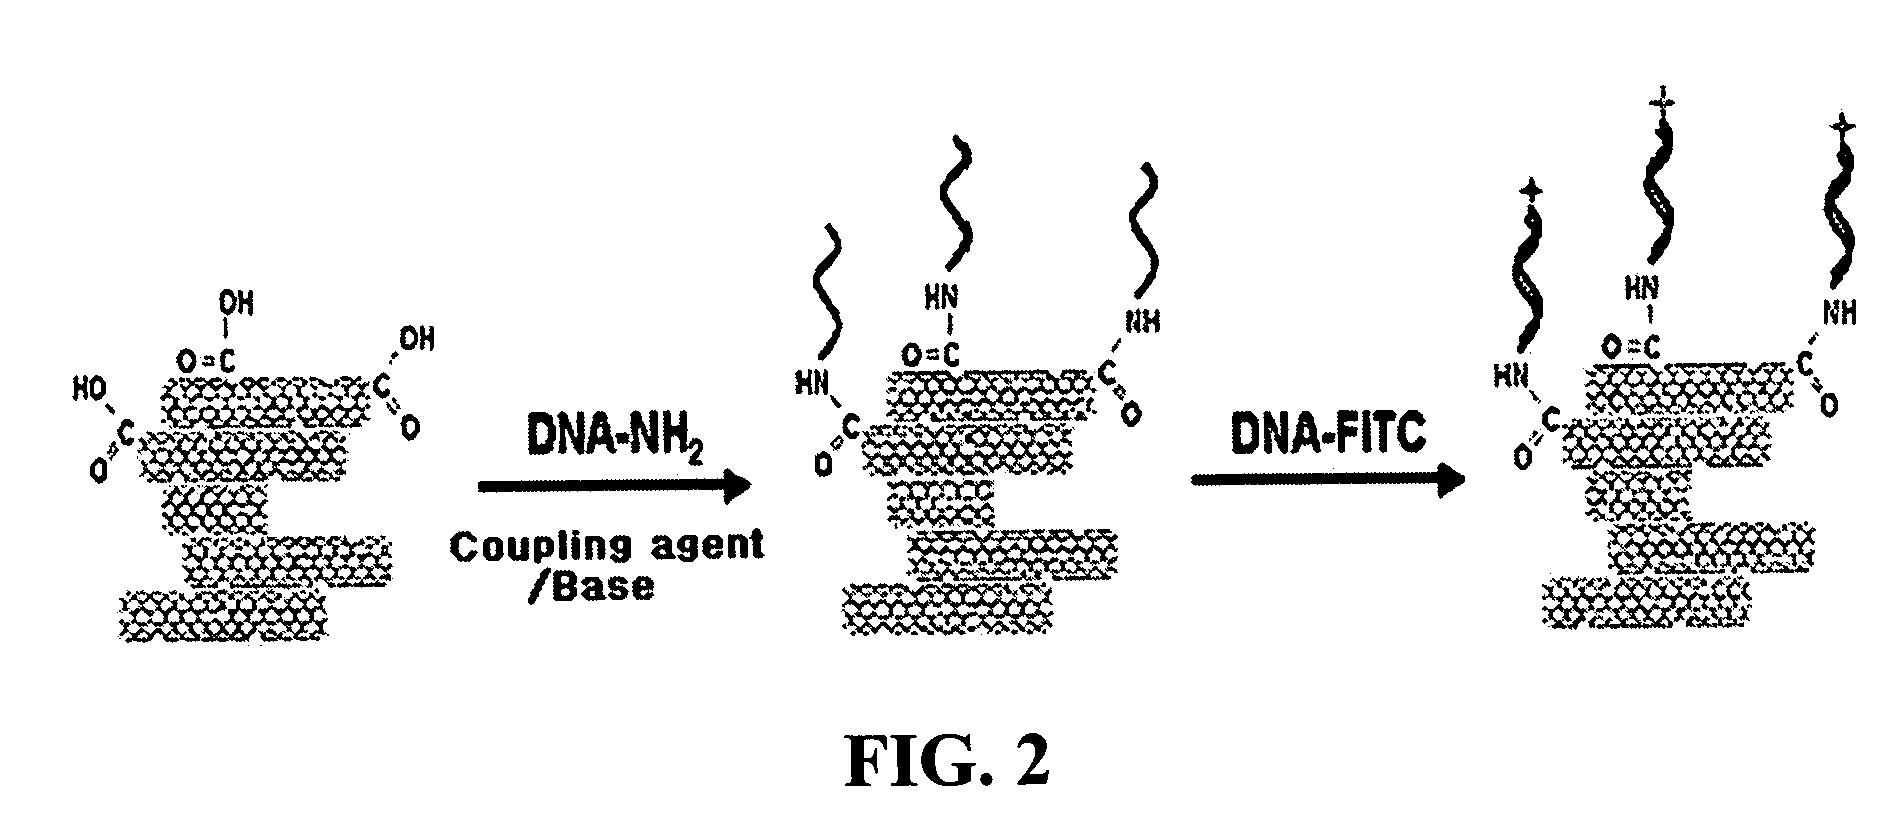 Method for fabricating a biochip using the high density carbon nanotube film or pattern